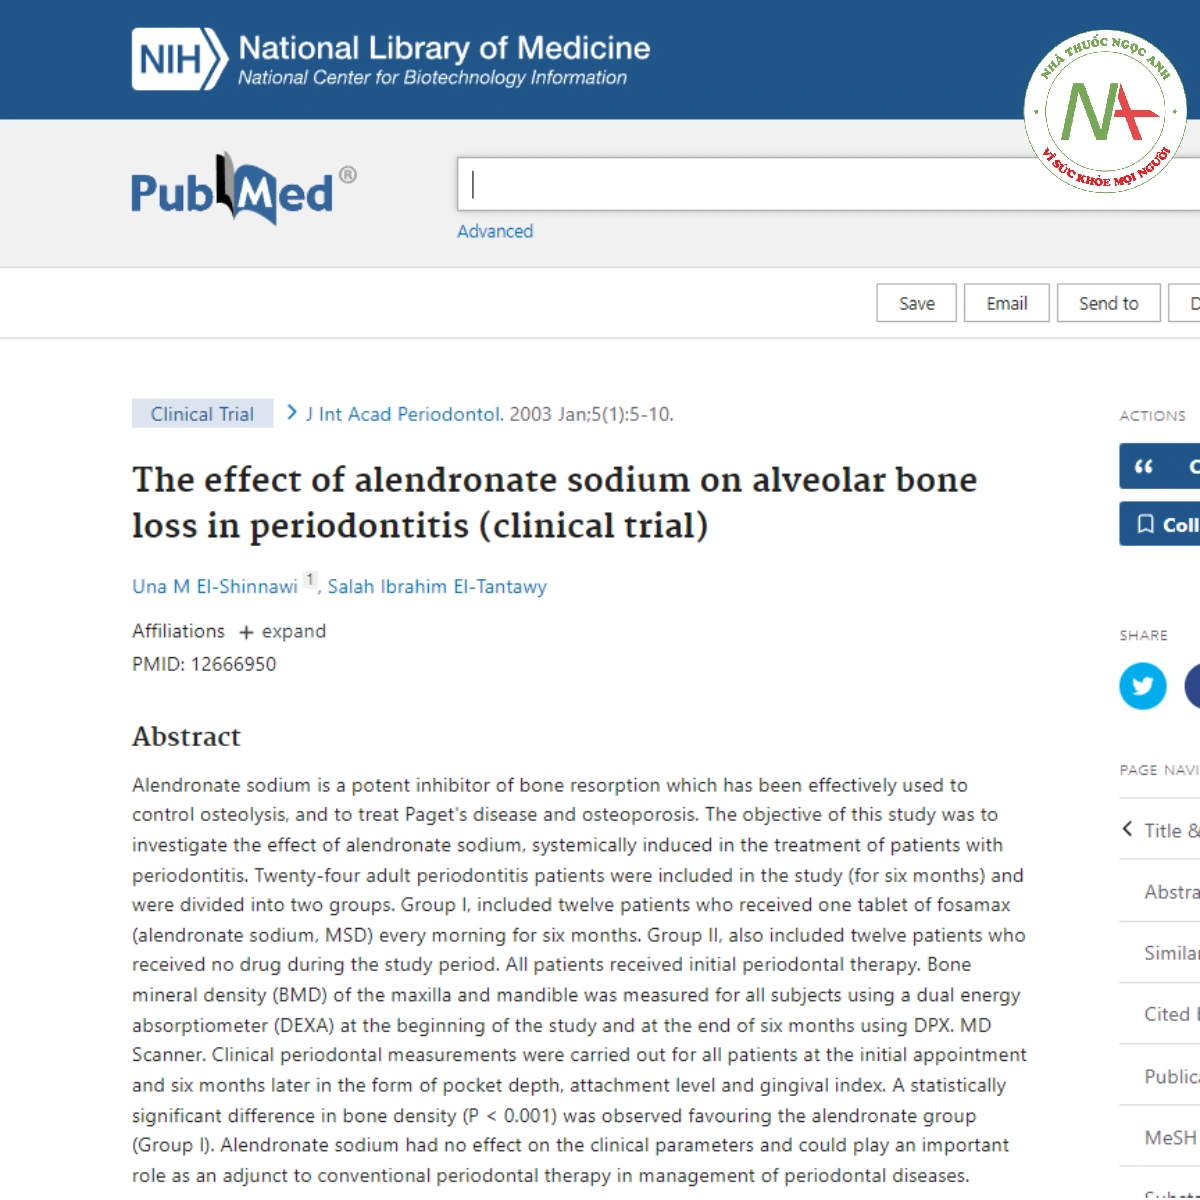 The effect of alendronate sodium on alveolar bone loss in periodontitis (clinical trial)